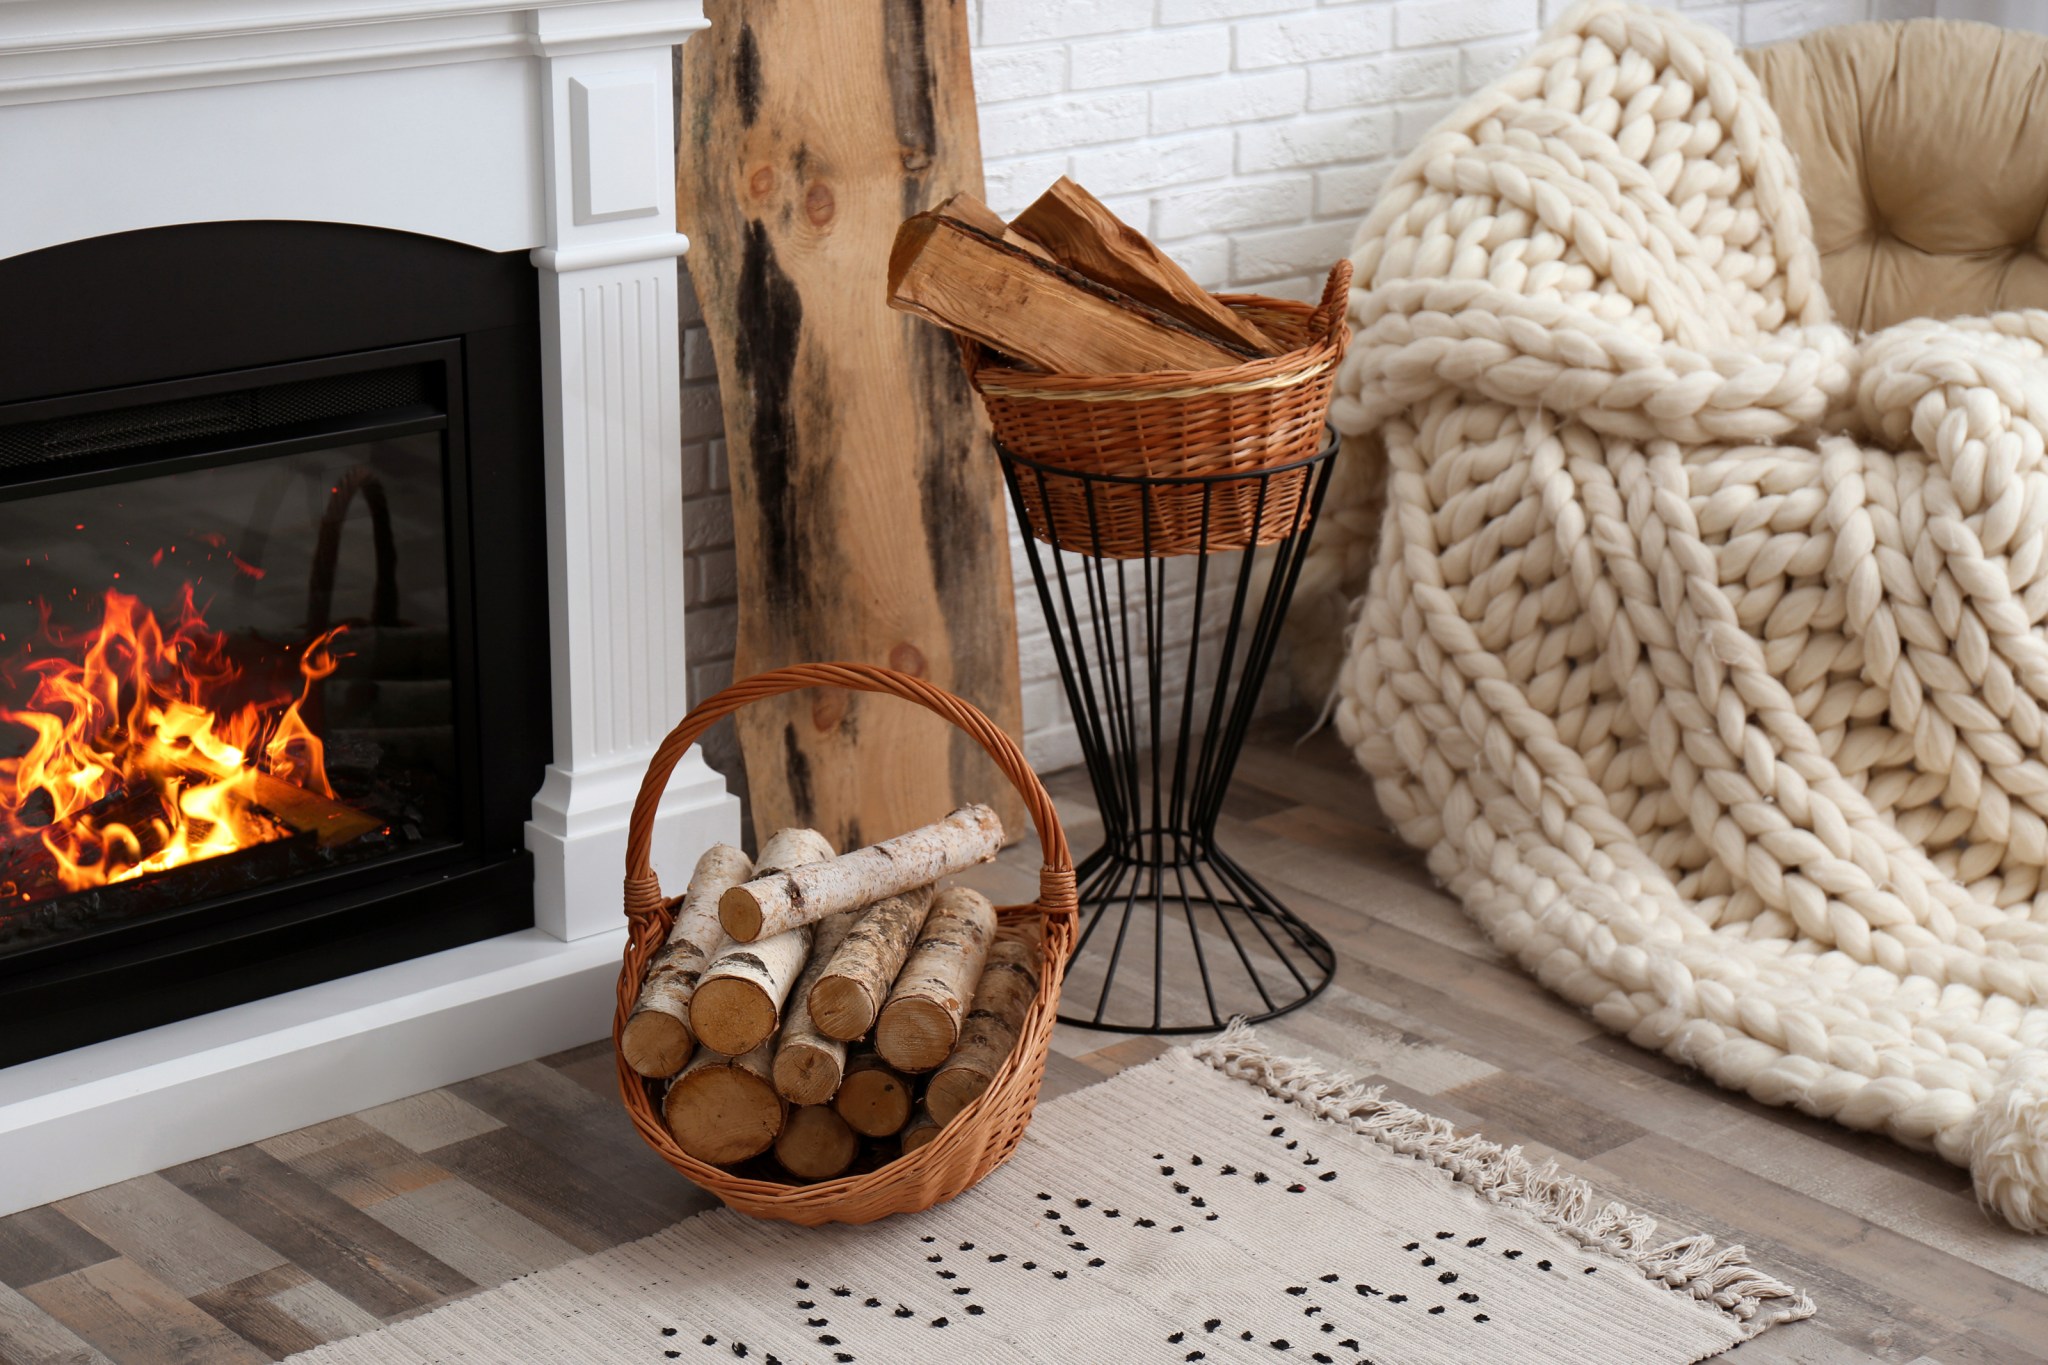 Natural light in cozy living room with wicker baskets with firewood and burning fireplace.